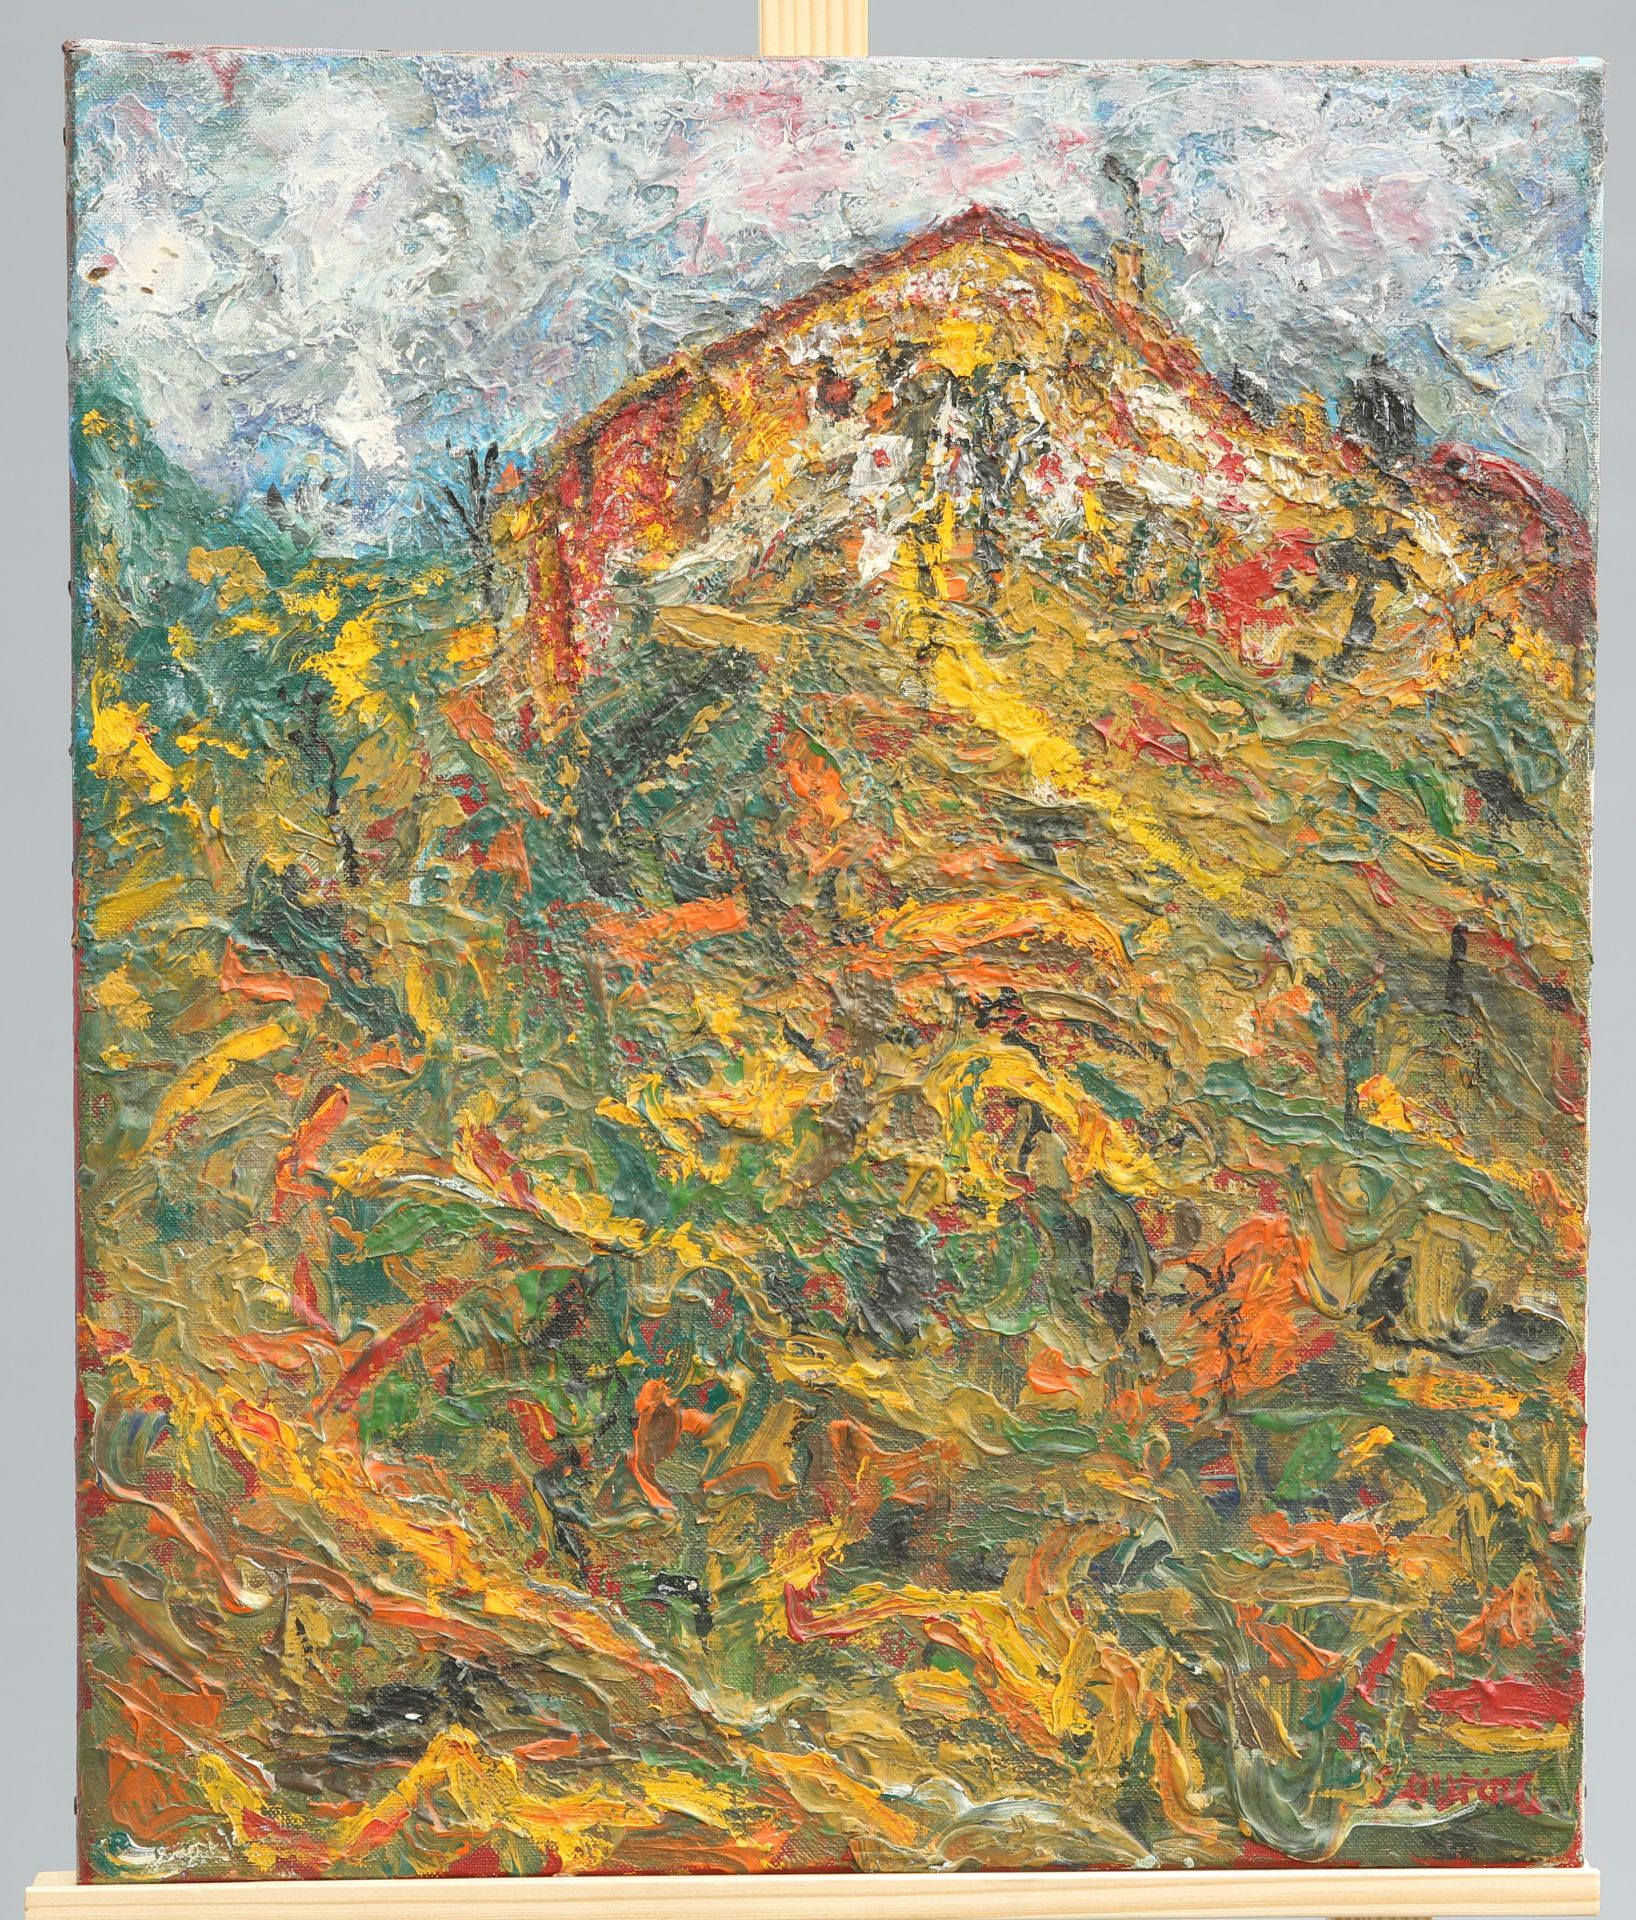 MANNER OF CHAIM SOUTINE (1893-1943), "PAYSAGE DE SERET", bears signature lower right and inscription